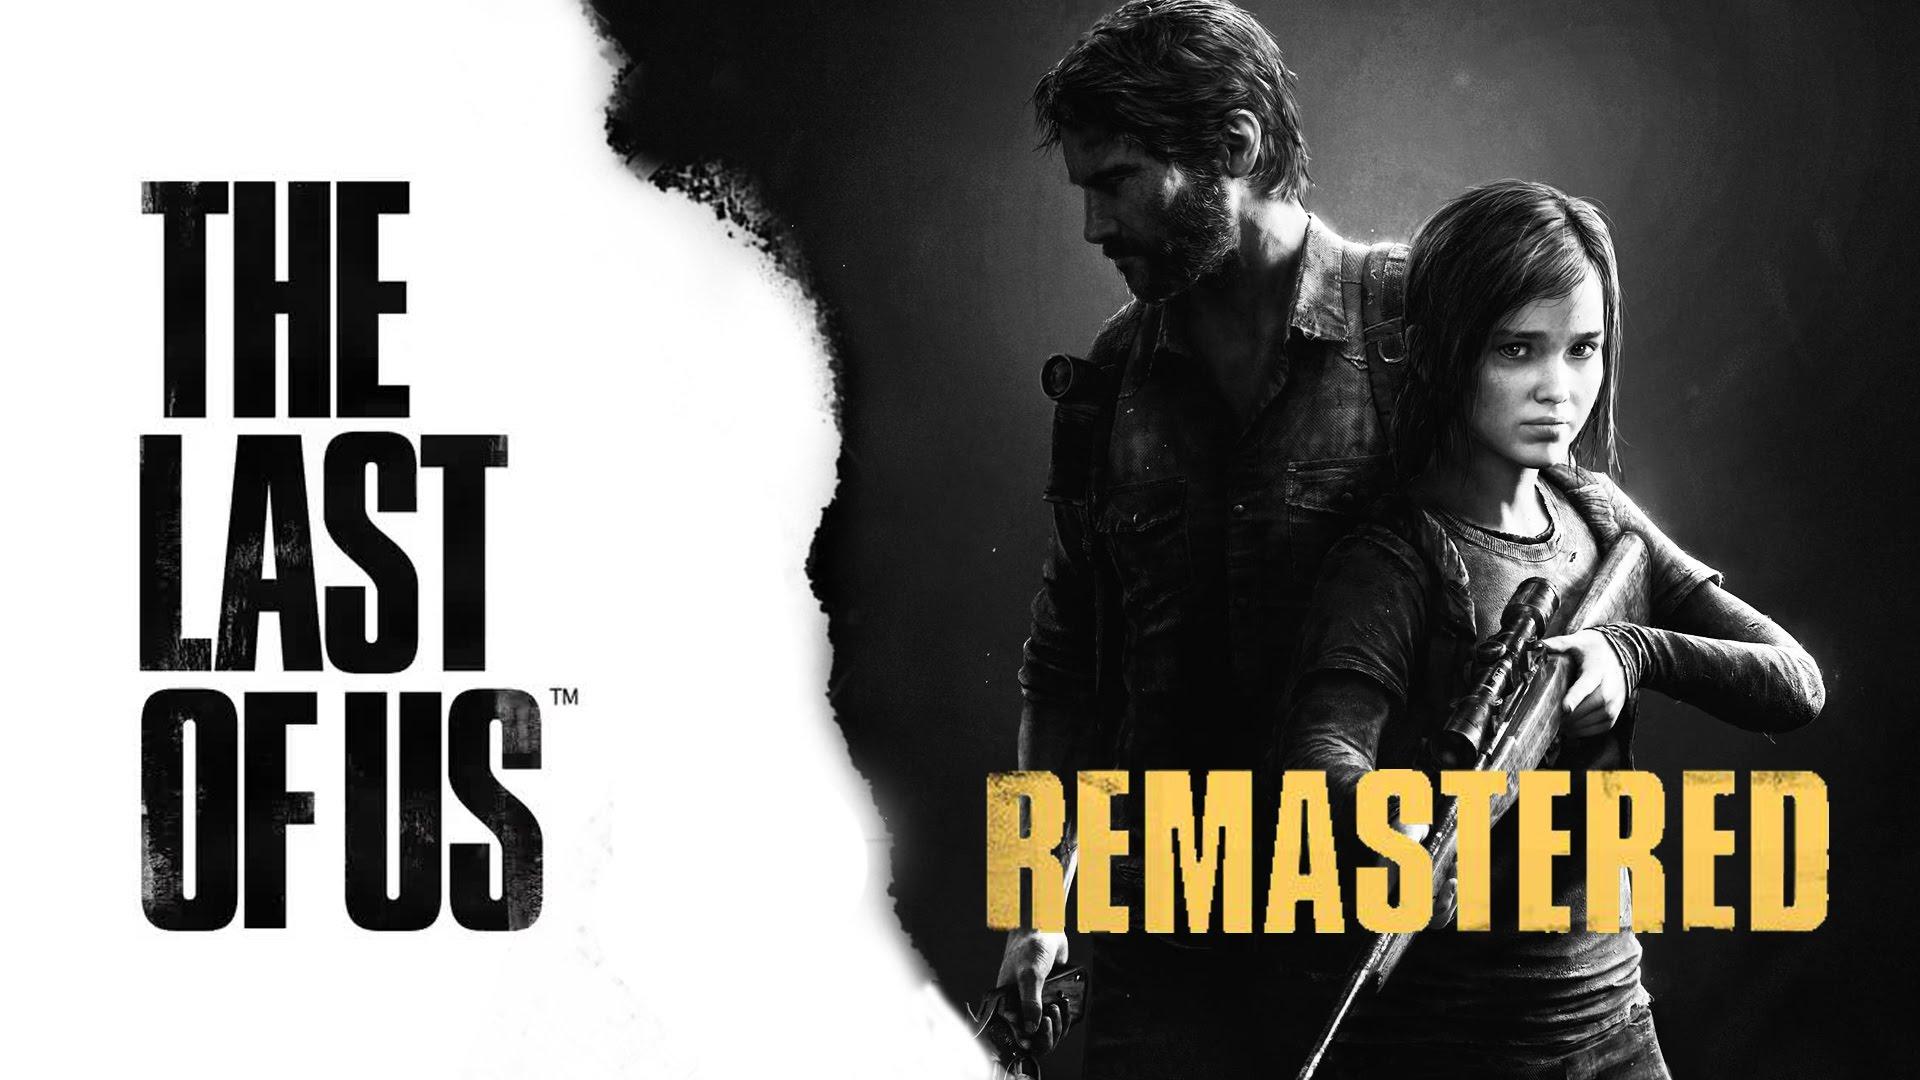 Hot The Last Of Us Remastered Background. XIK19 Full HD Quality